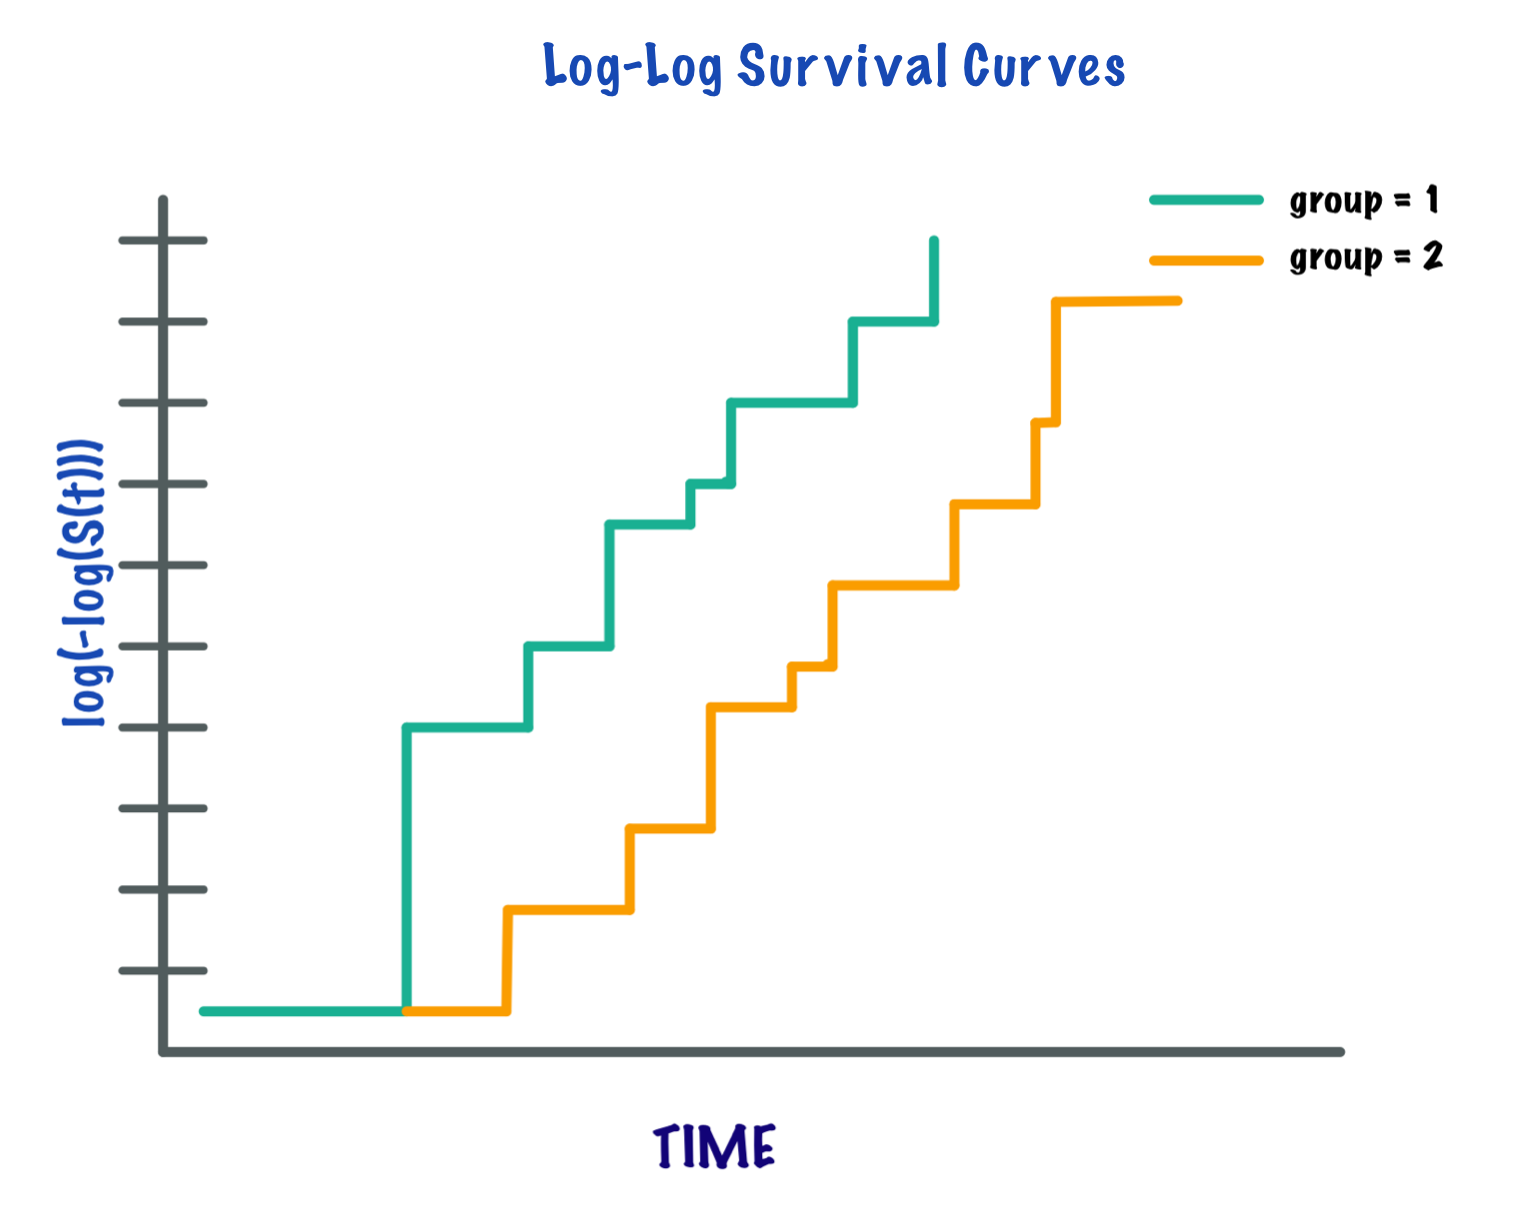 The proportional hazards assumption states that the survival curves for different strata in the data are proportional over time and can be assessed by gauging the parallel nature of log-log survival curves.